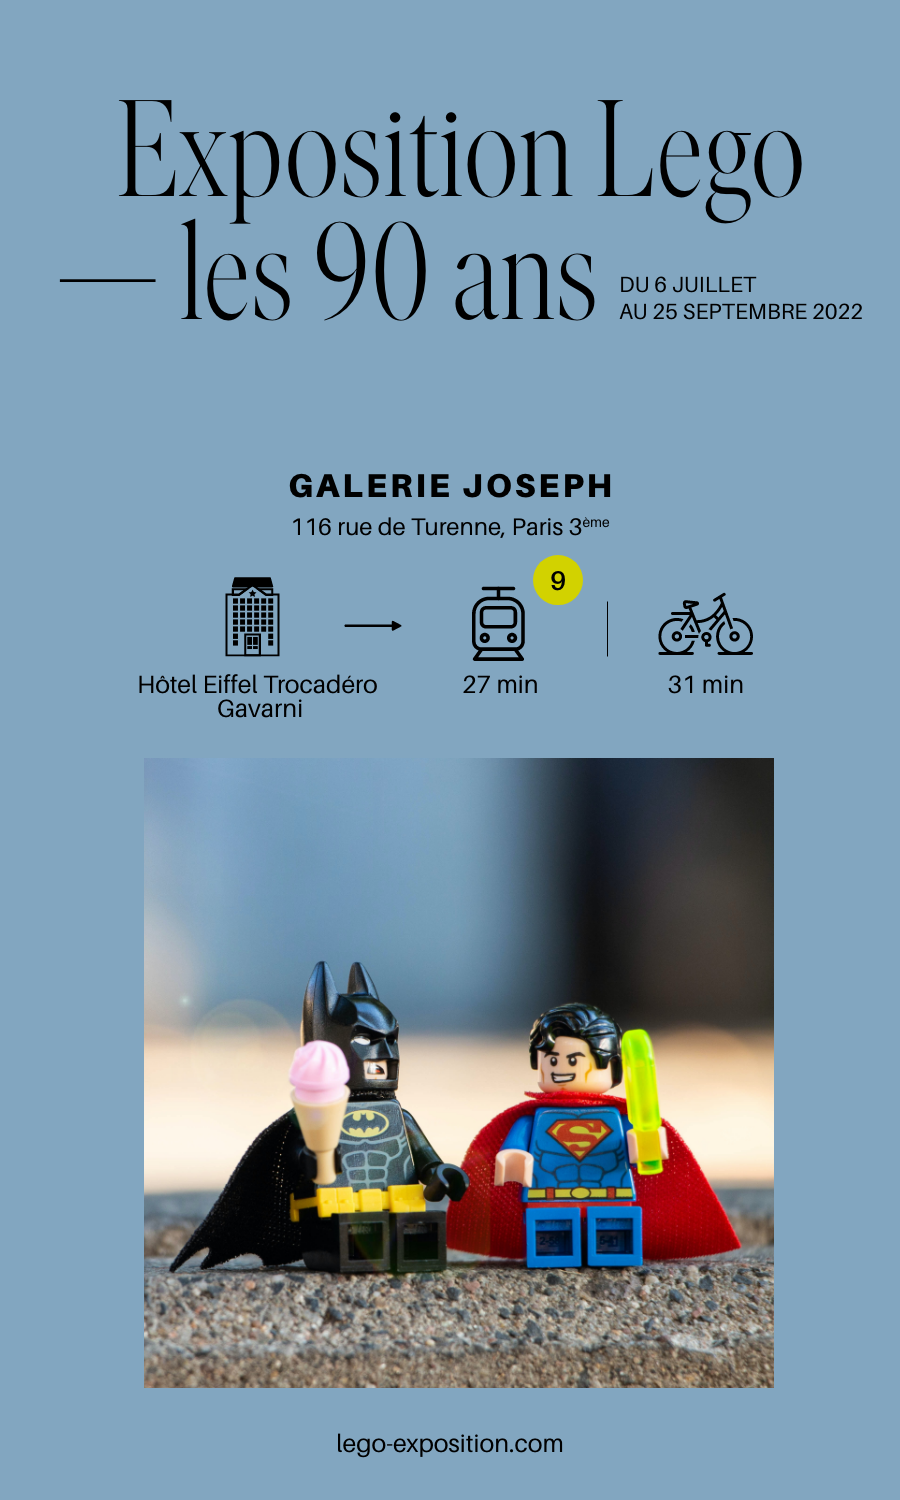 LEGO EXHIBITION : 90 YEARS OF CREATIVITY, THE JUBILEE EXHIBITION